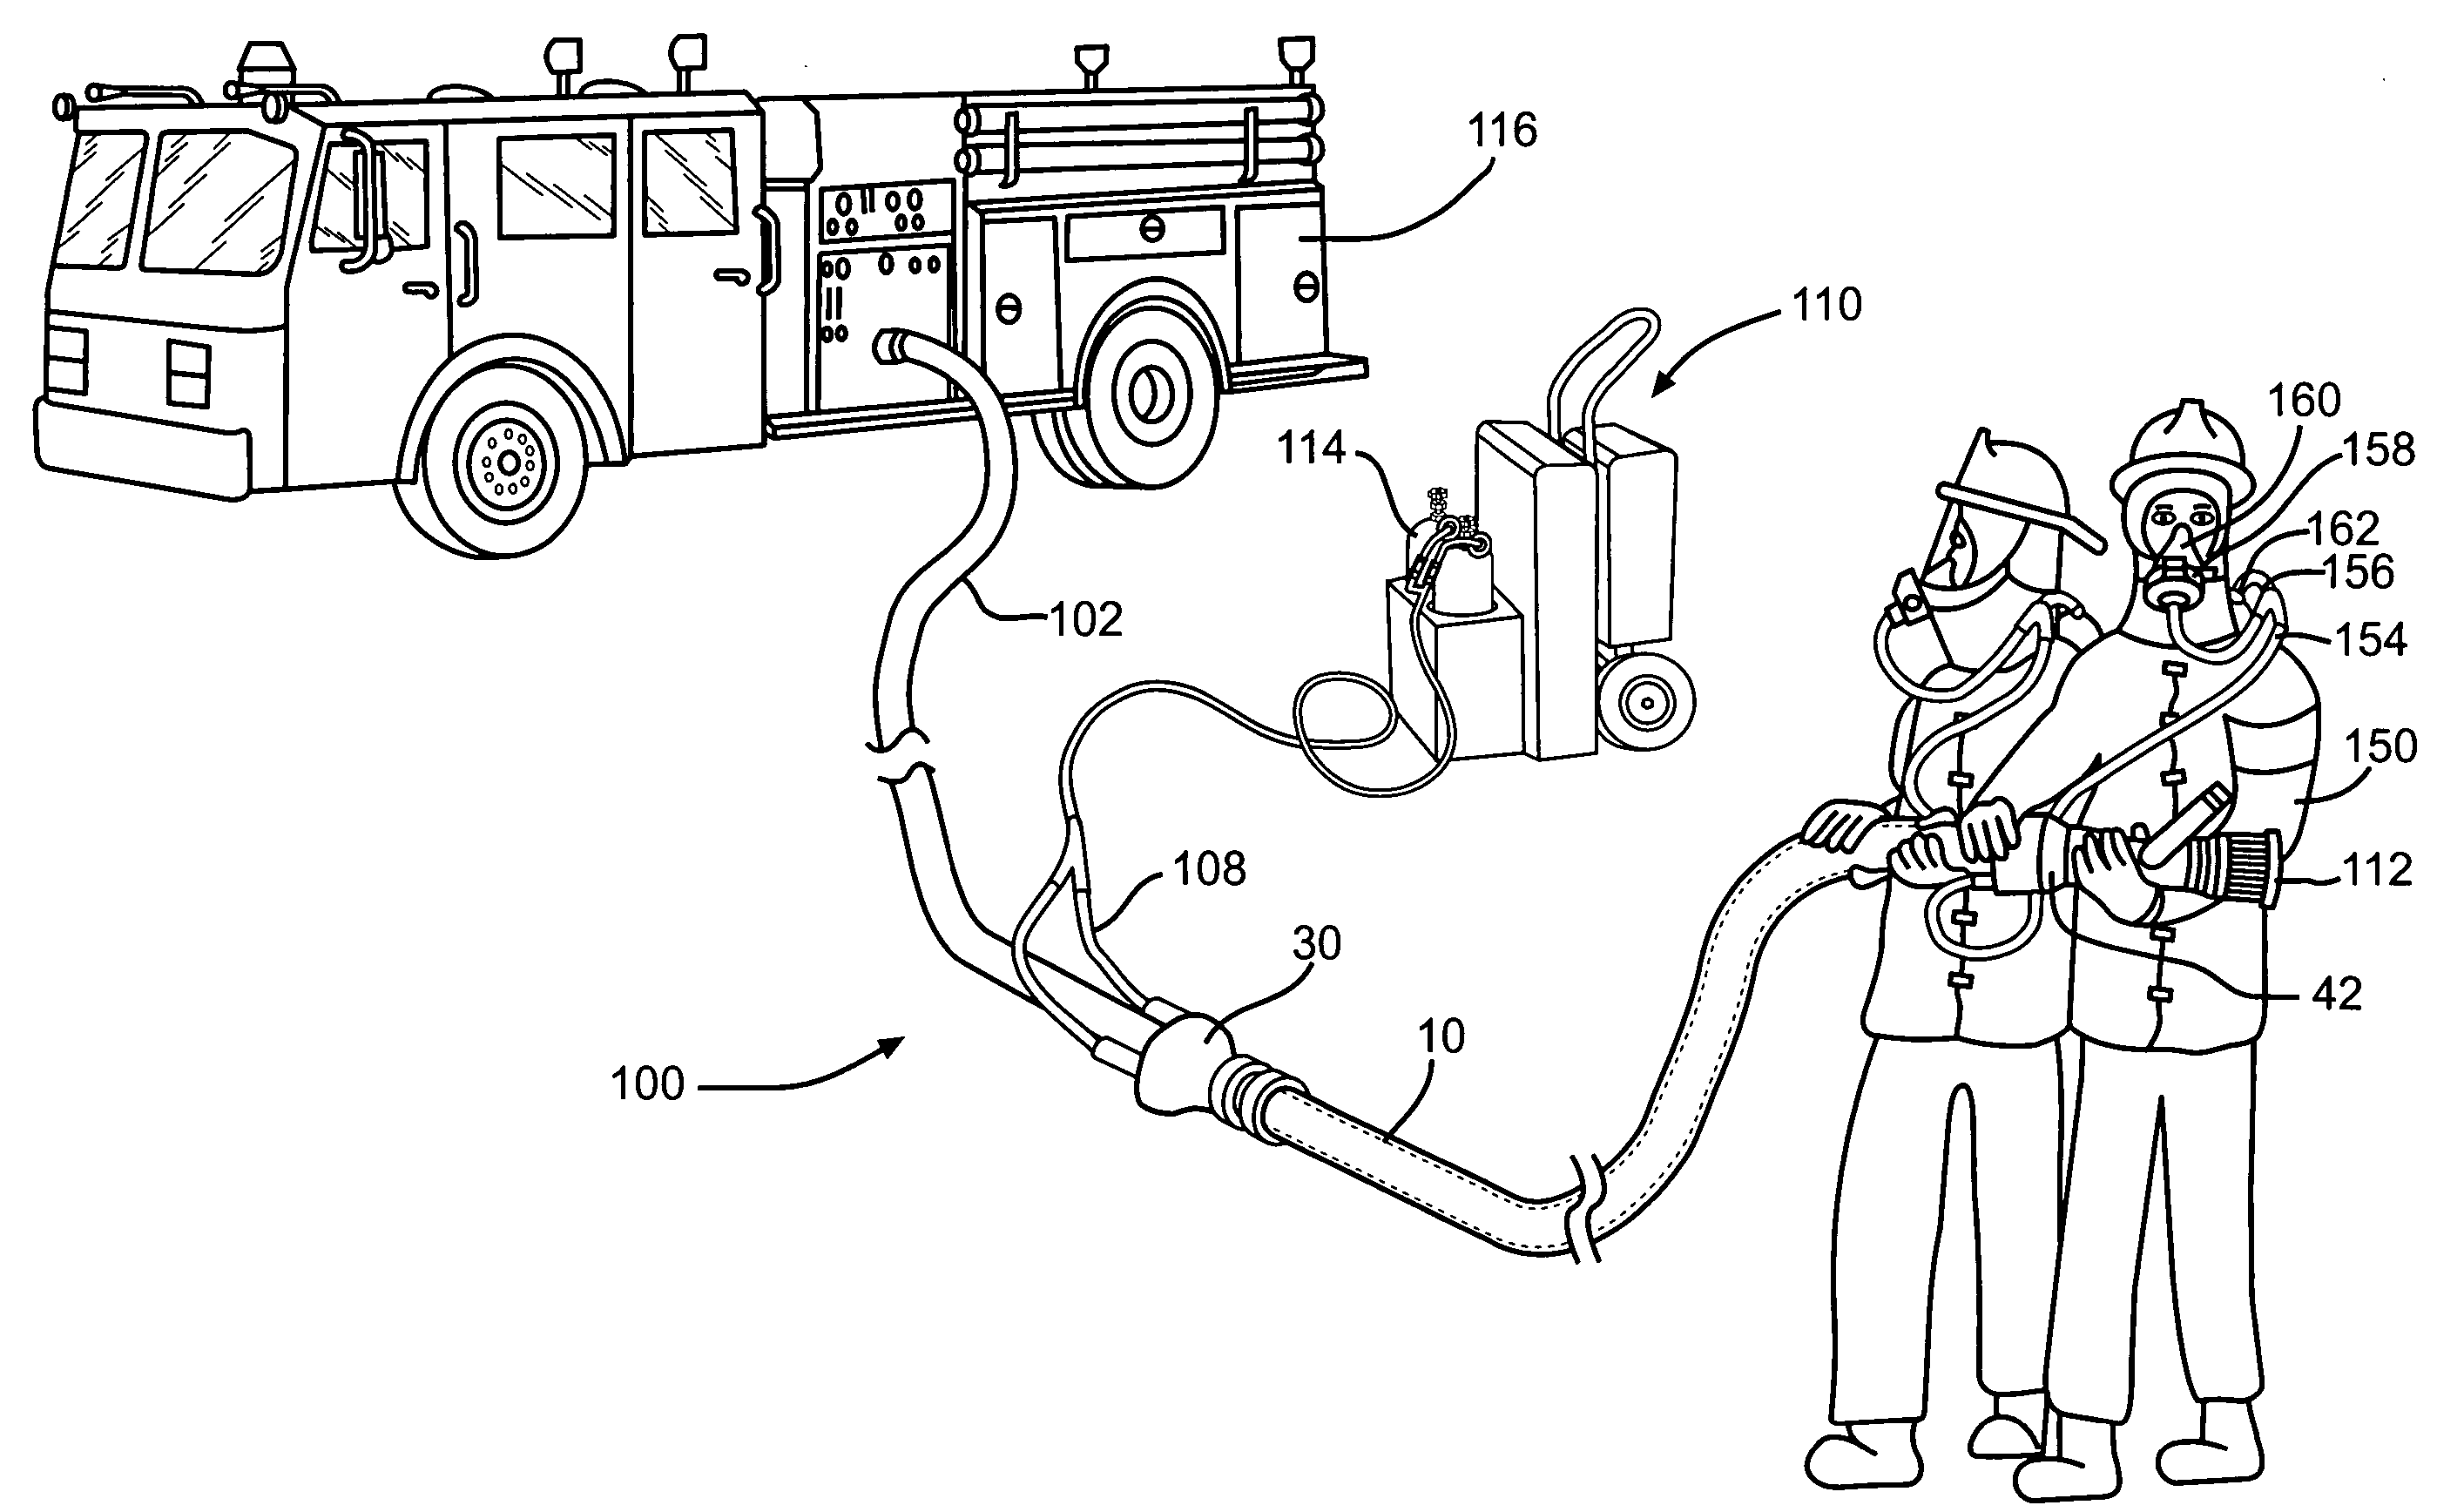 Air and water hose apparatus for firefighters